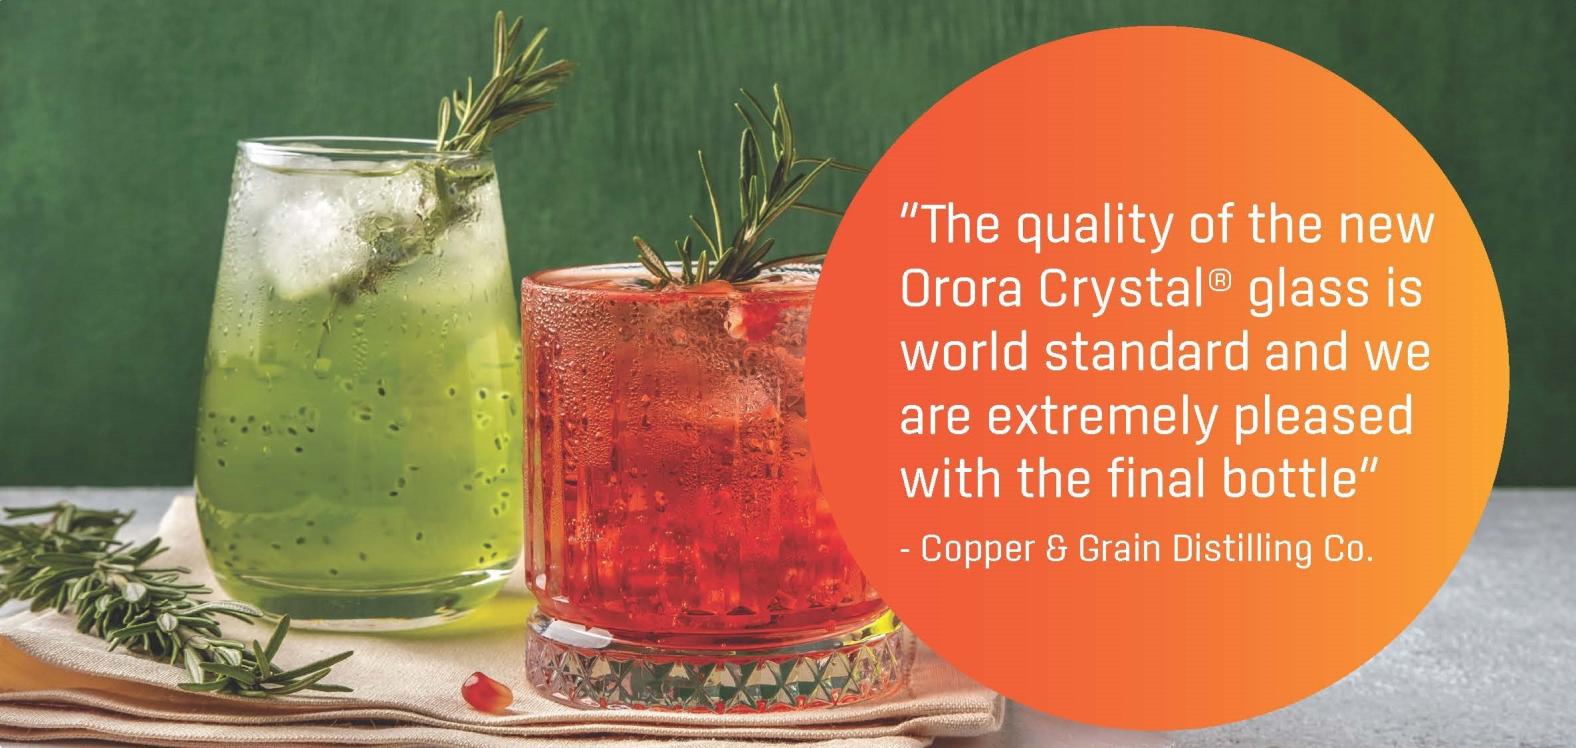 Orora Crystal quote from customer